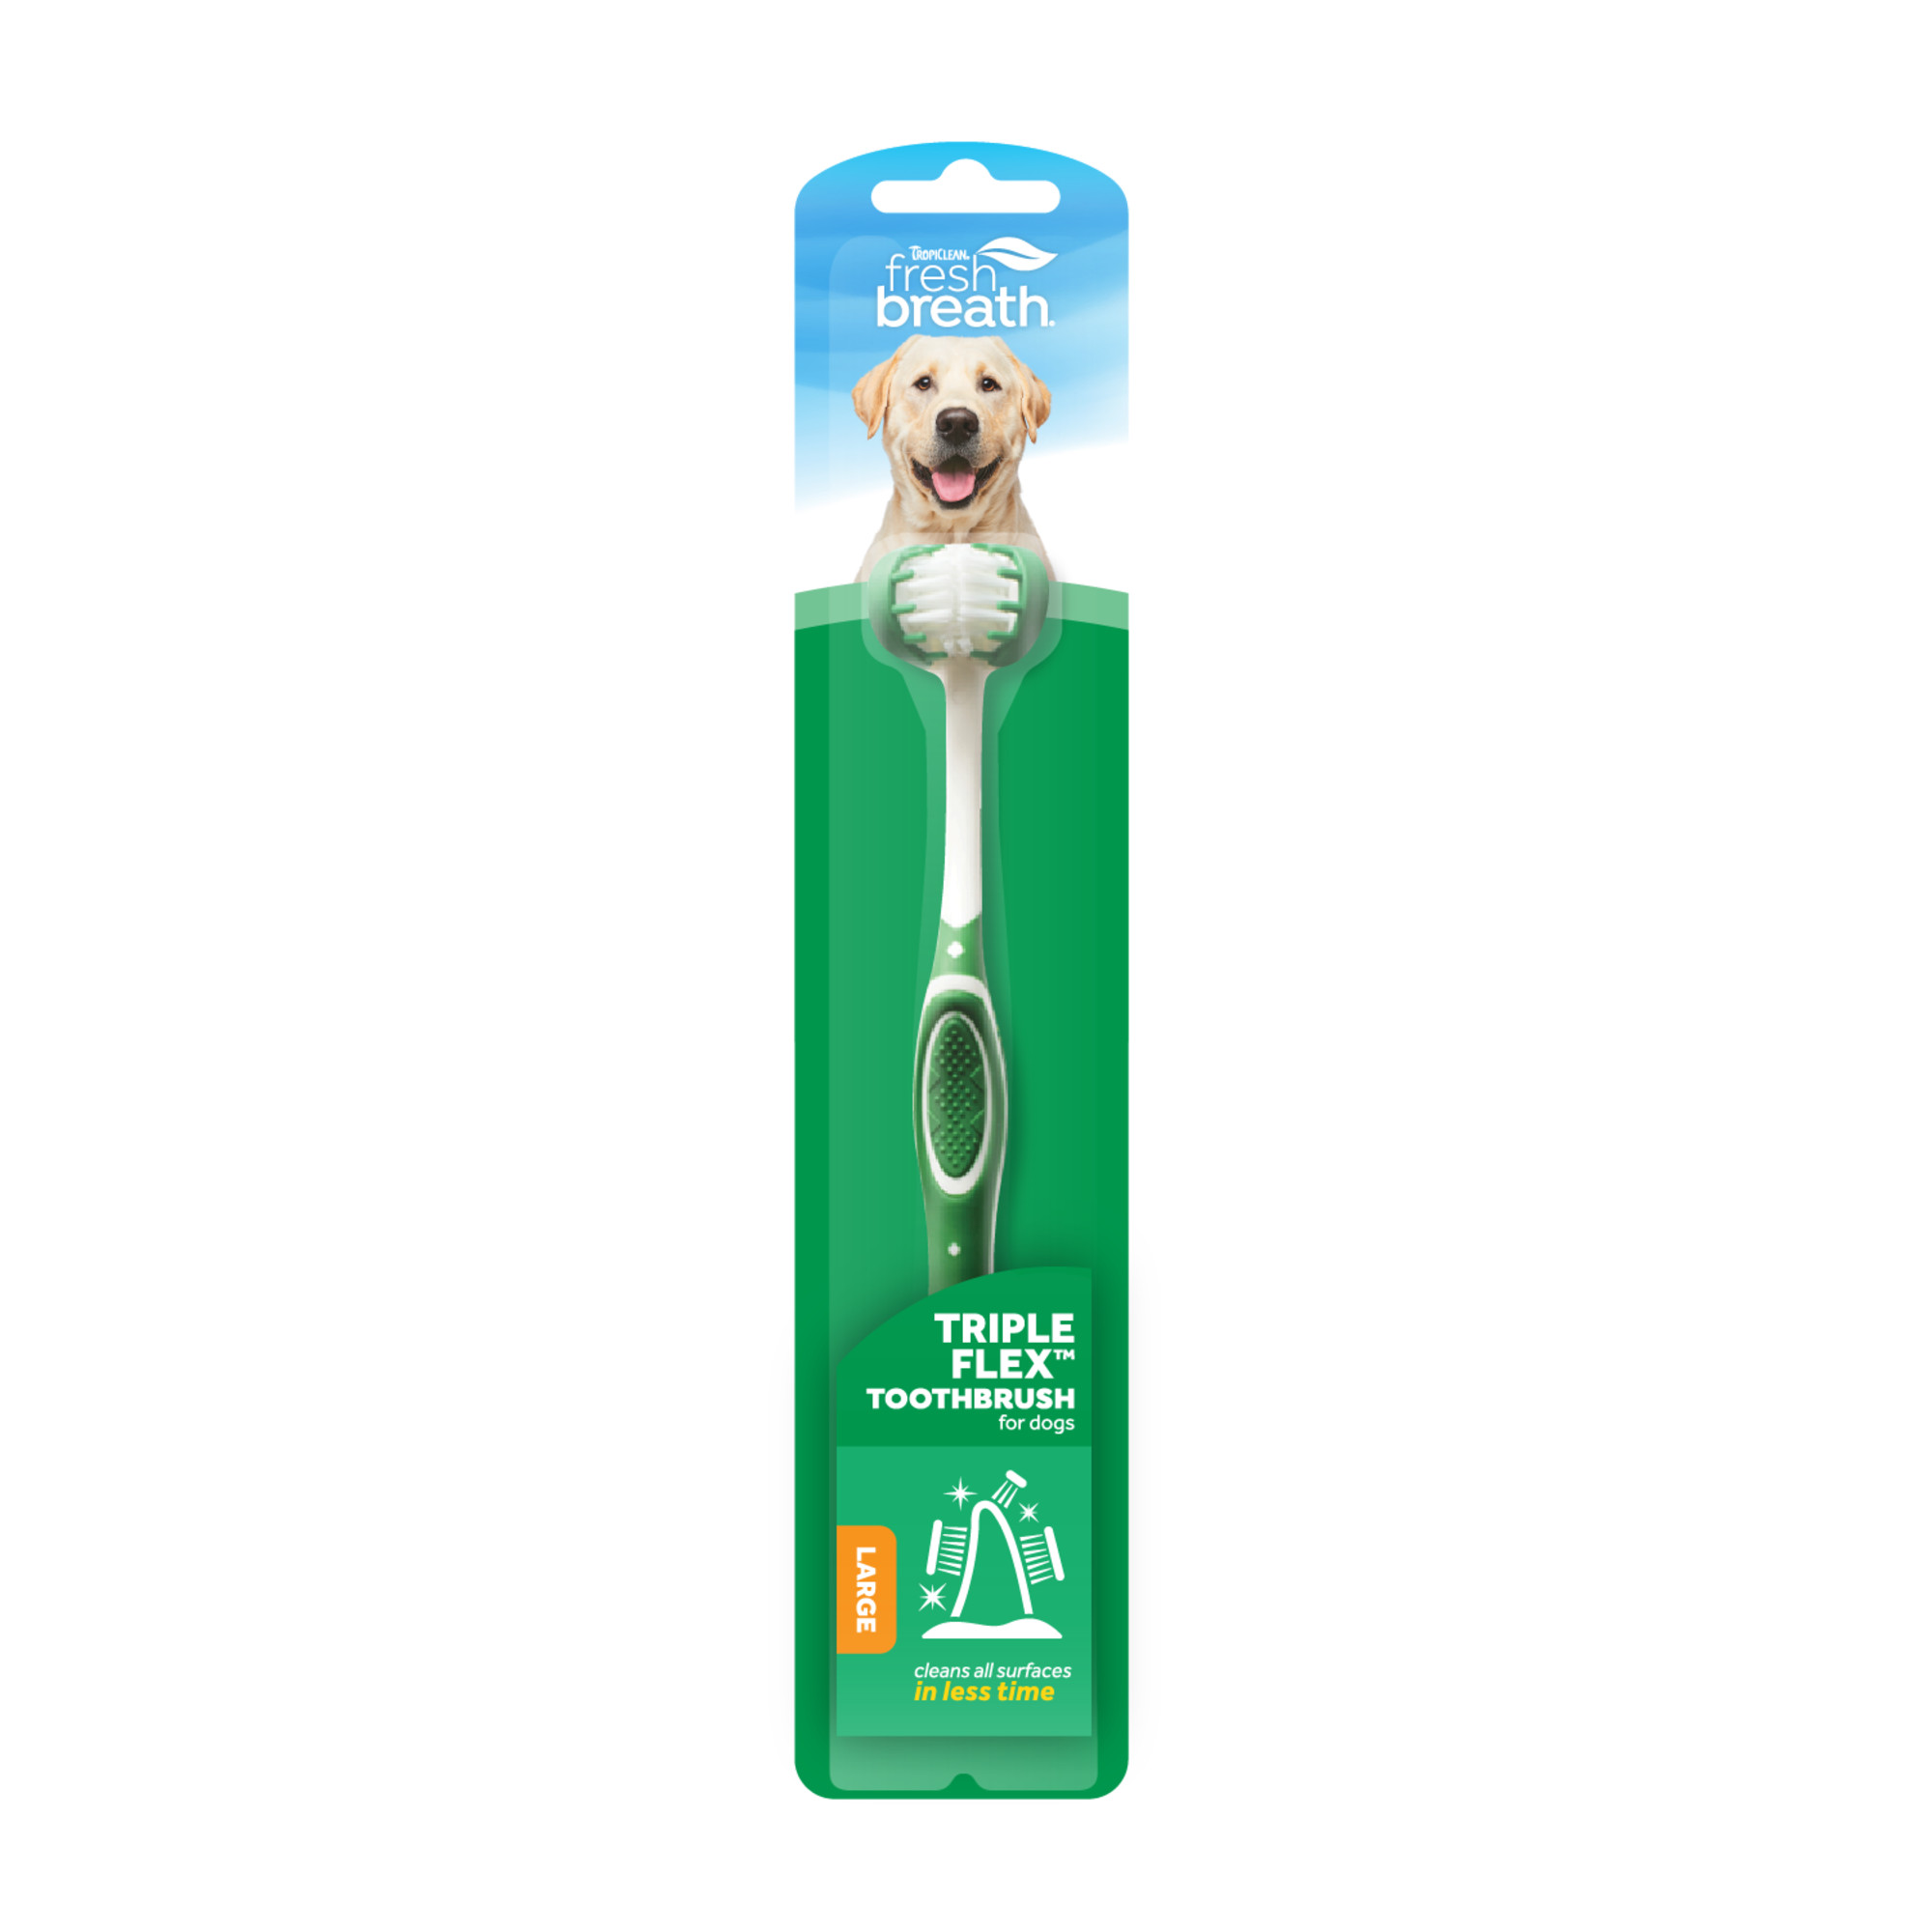 Tripleflex Toothbrush for Large Dogs